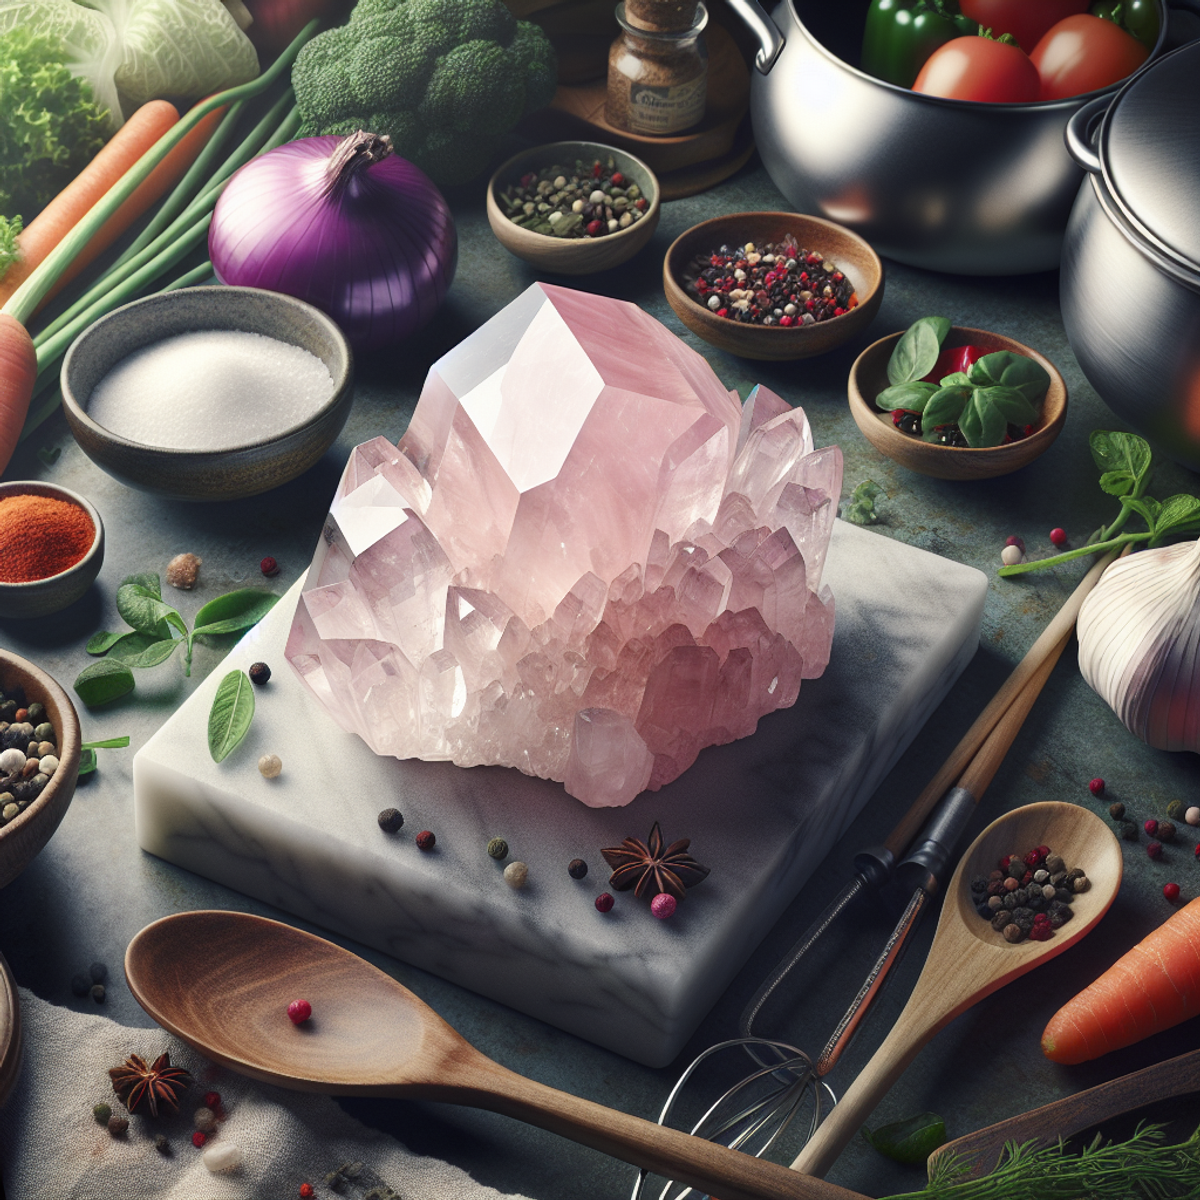 A close-up image of a beautiful, pink Rose Quartz crystal resting on a kitchen countertop surrounded by an array of fresh ingredients like vegetables, herbs, and spices, along with cooking utensils such as a wooden spoon, a whisk, and a cooking pot.